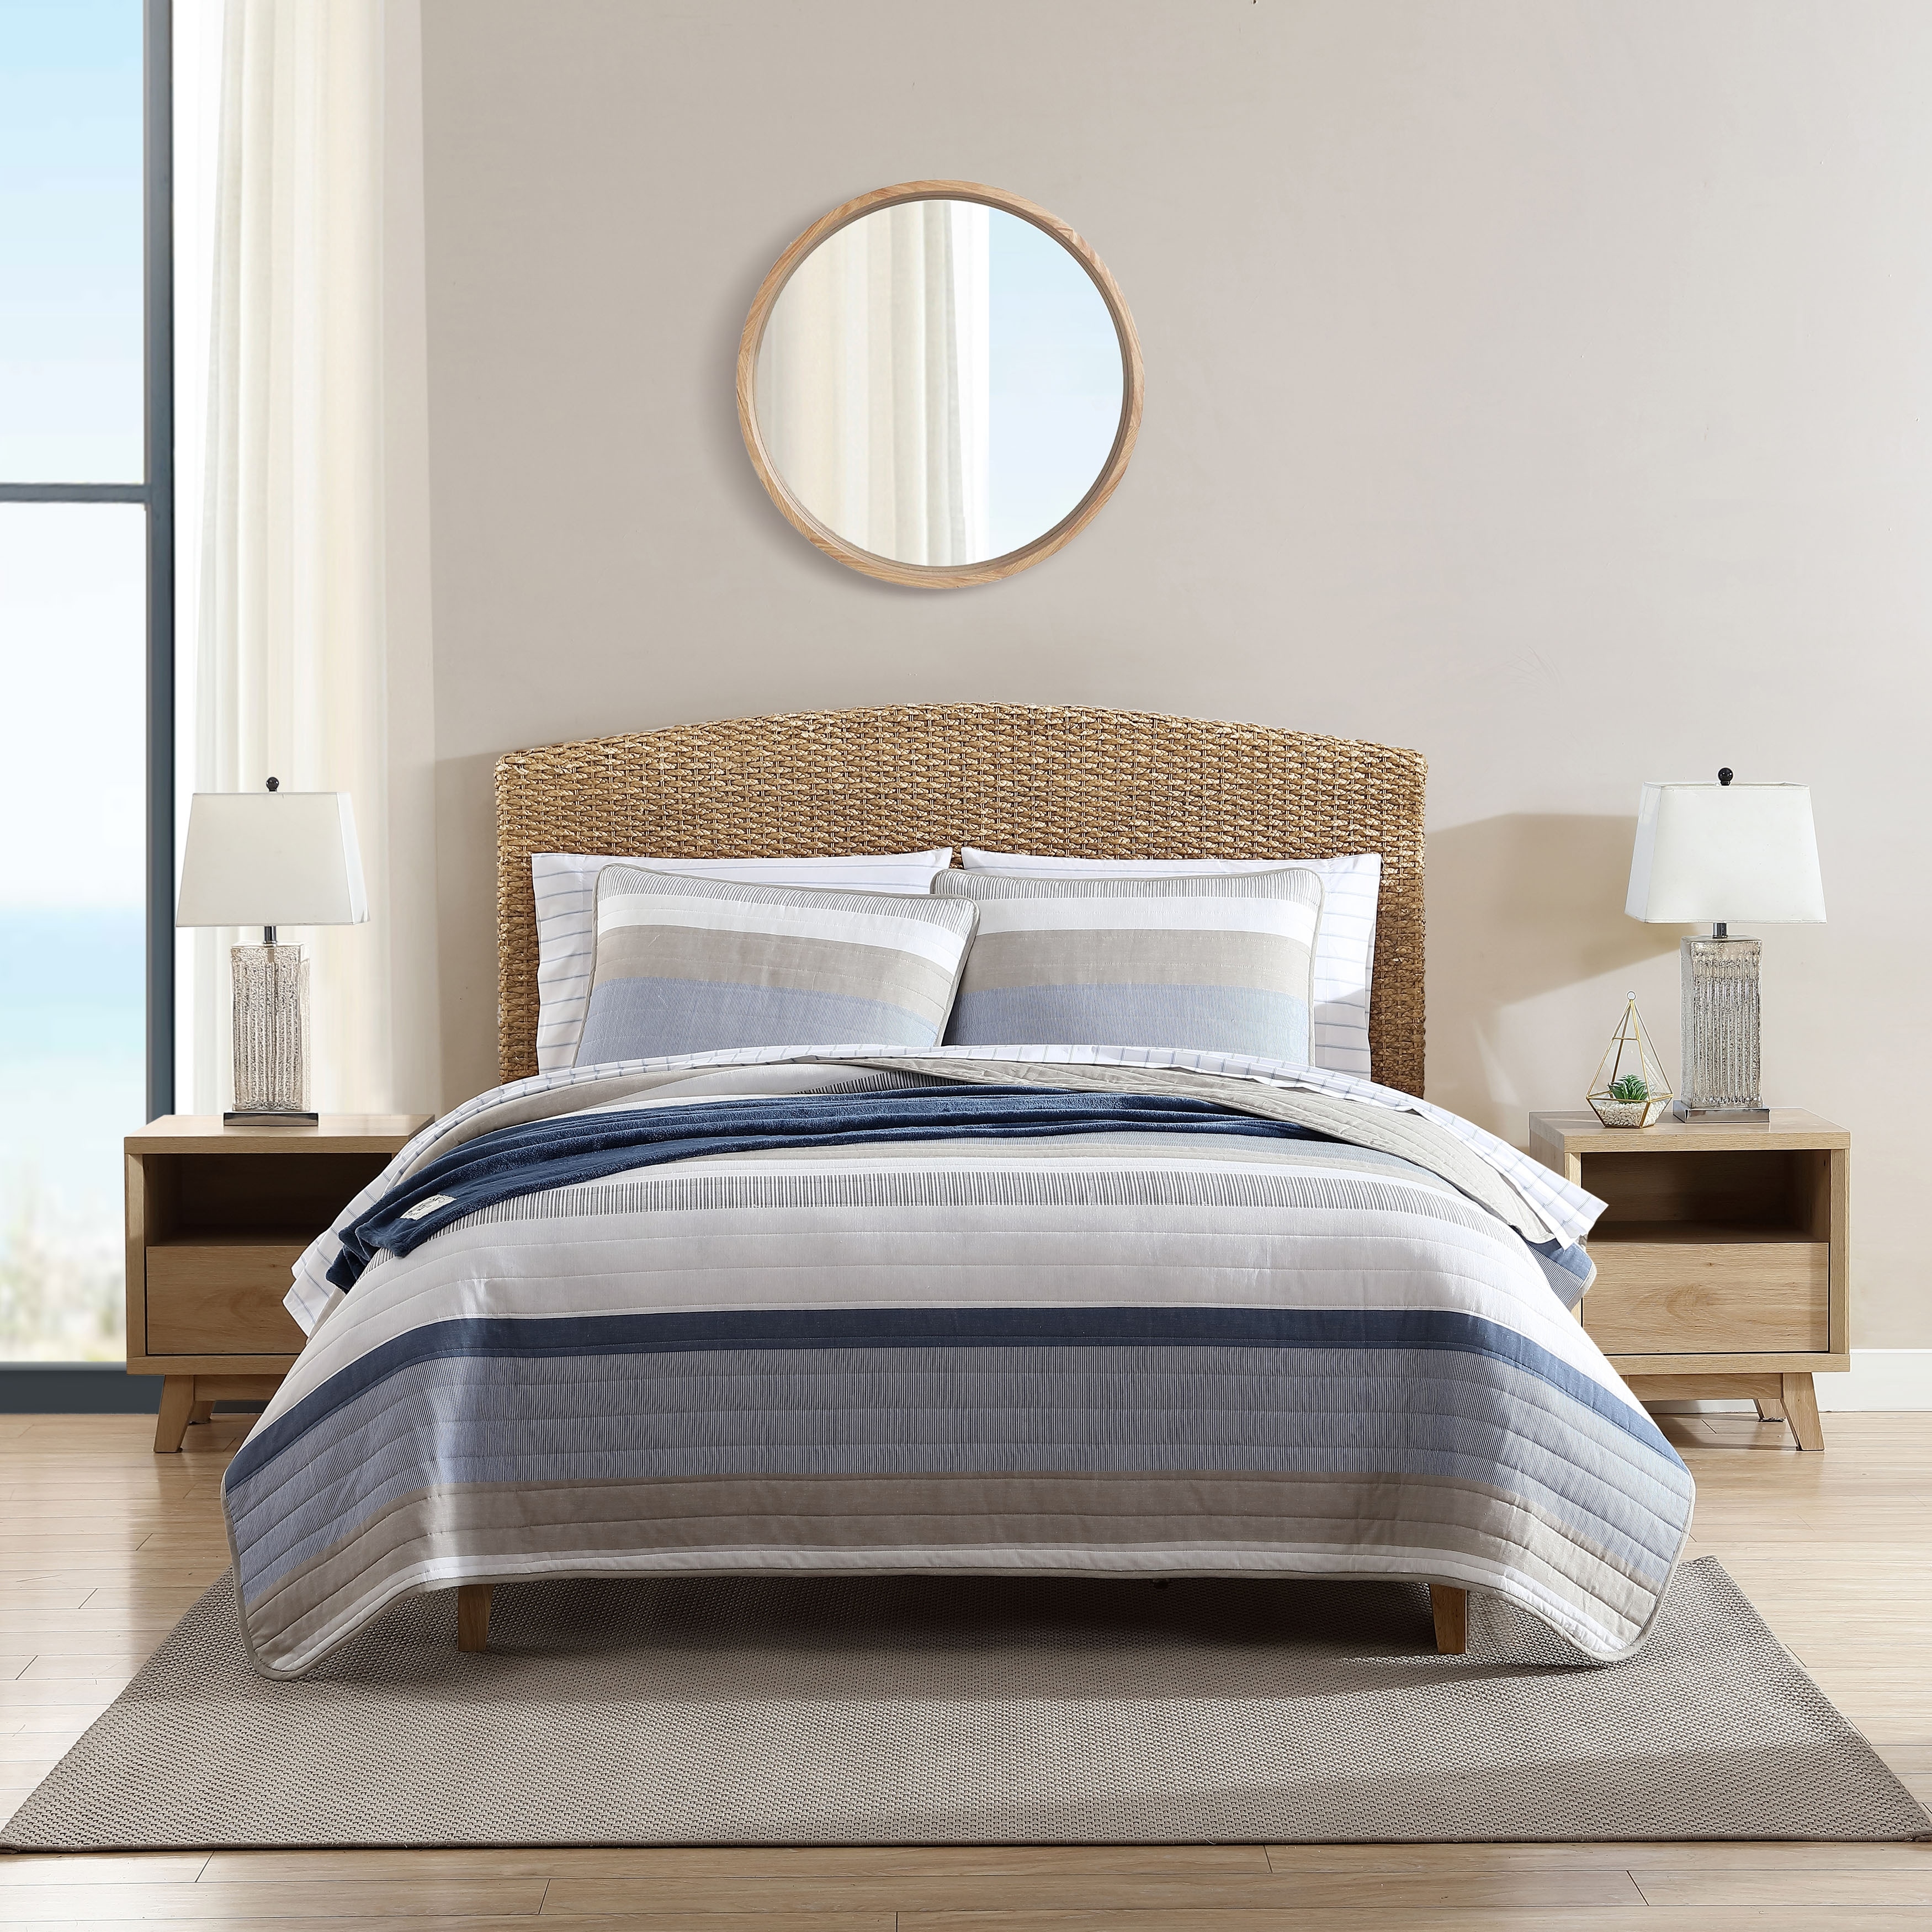 https://ak1.ostkcdn.com/images/products/is/images/direct/51defbf6af2109fe0ad16156036a80791cf1a3d7/Nautica-100%25-Cotton-Galewood-Quilt-Set.jpg